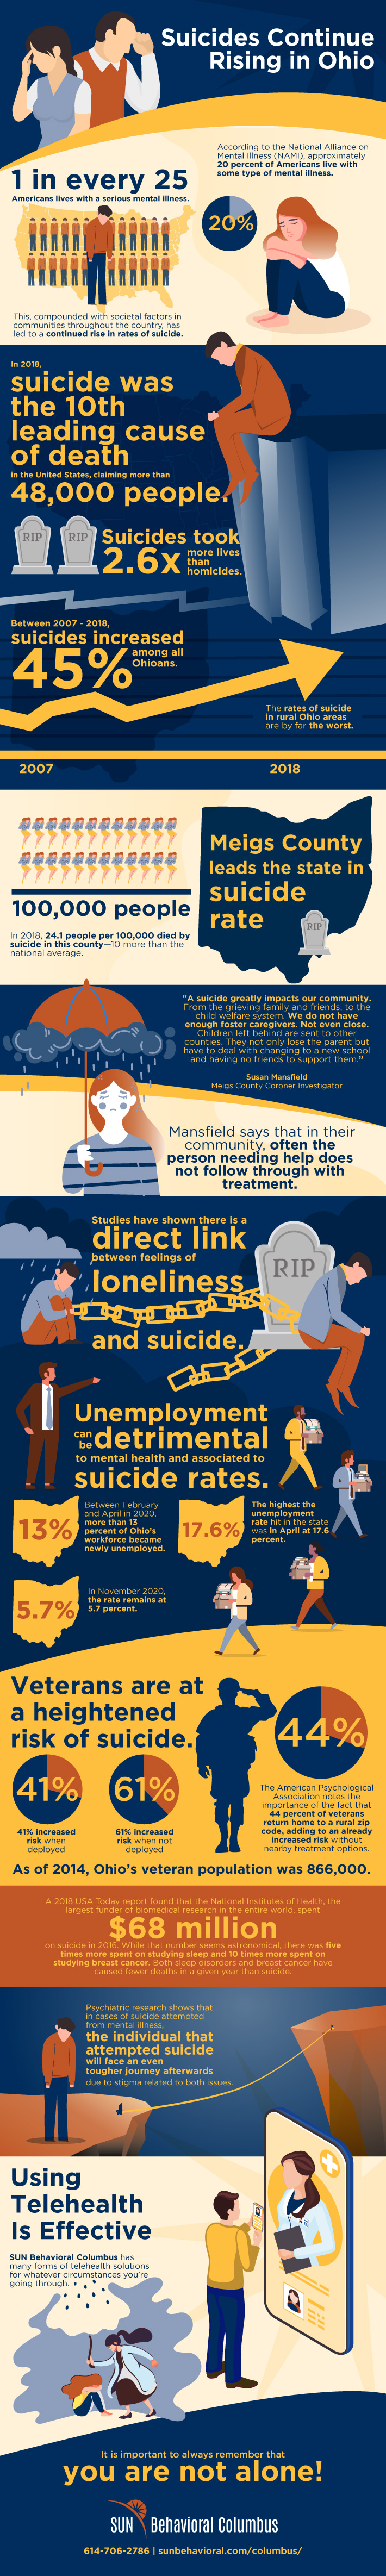 SUN OH Suicide Infographic